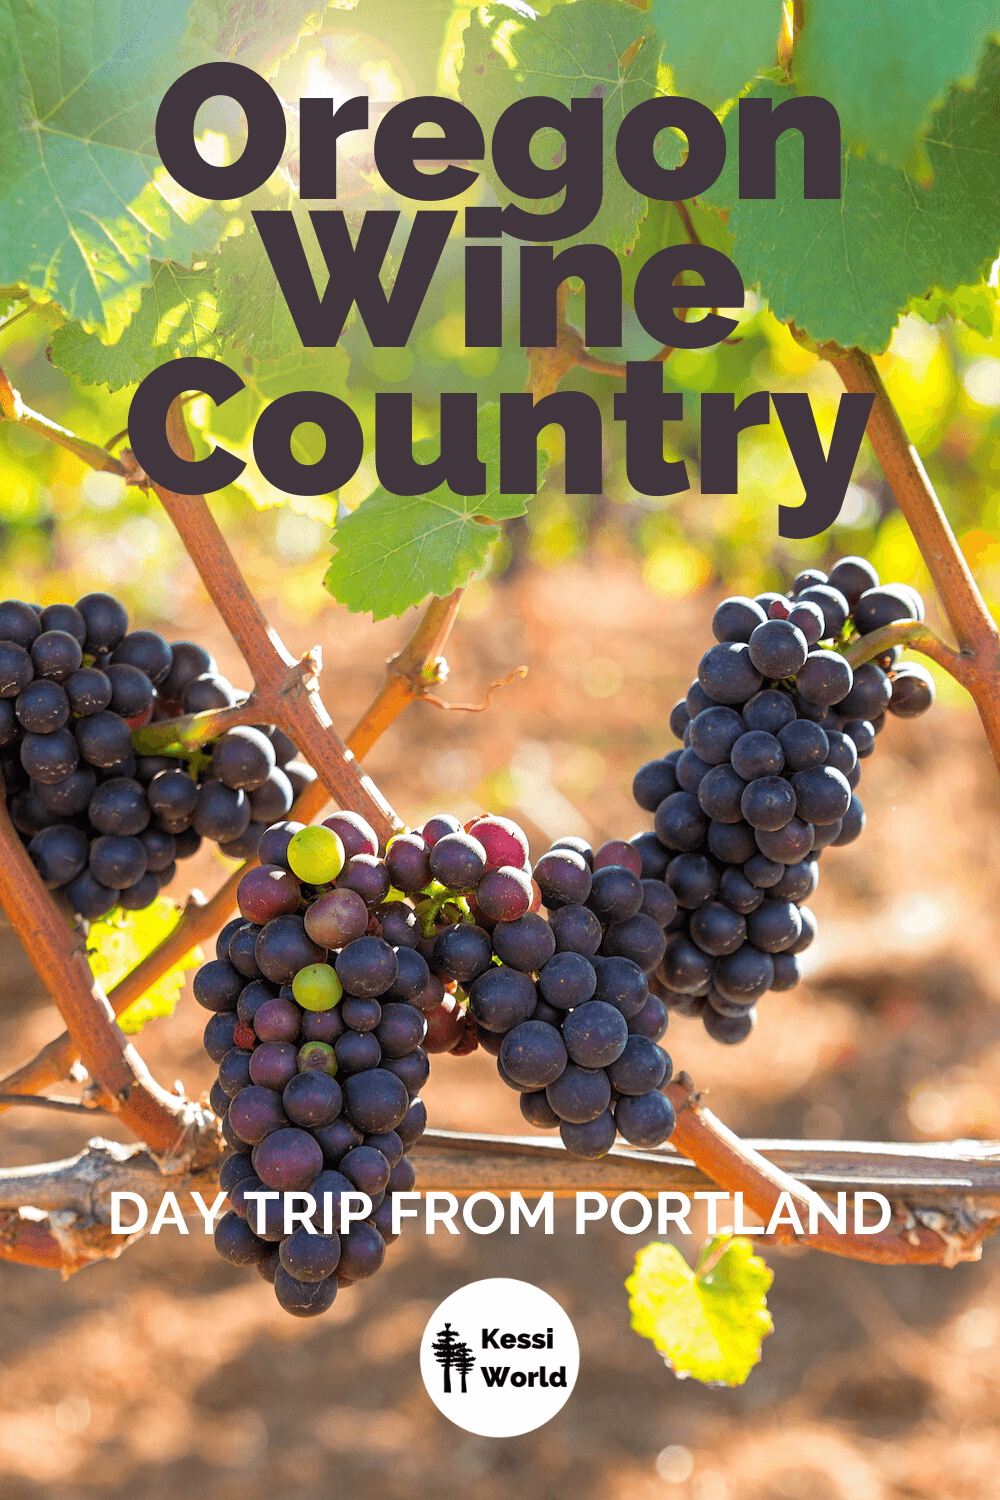 This Pinterest tile shows Oregon wine country's rows upon rows of vineyards with violet colored grapes. This scene shows the ripening grapes still attached to a brown colored vine while the sun shines through the leafy part of the plant. Oregon Wine Country makes a great day trip from Portland, Oregon